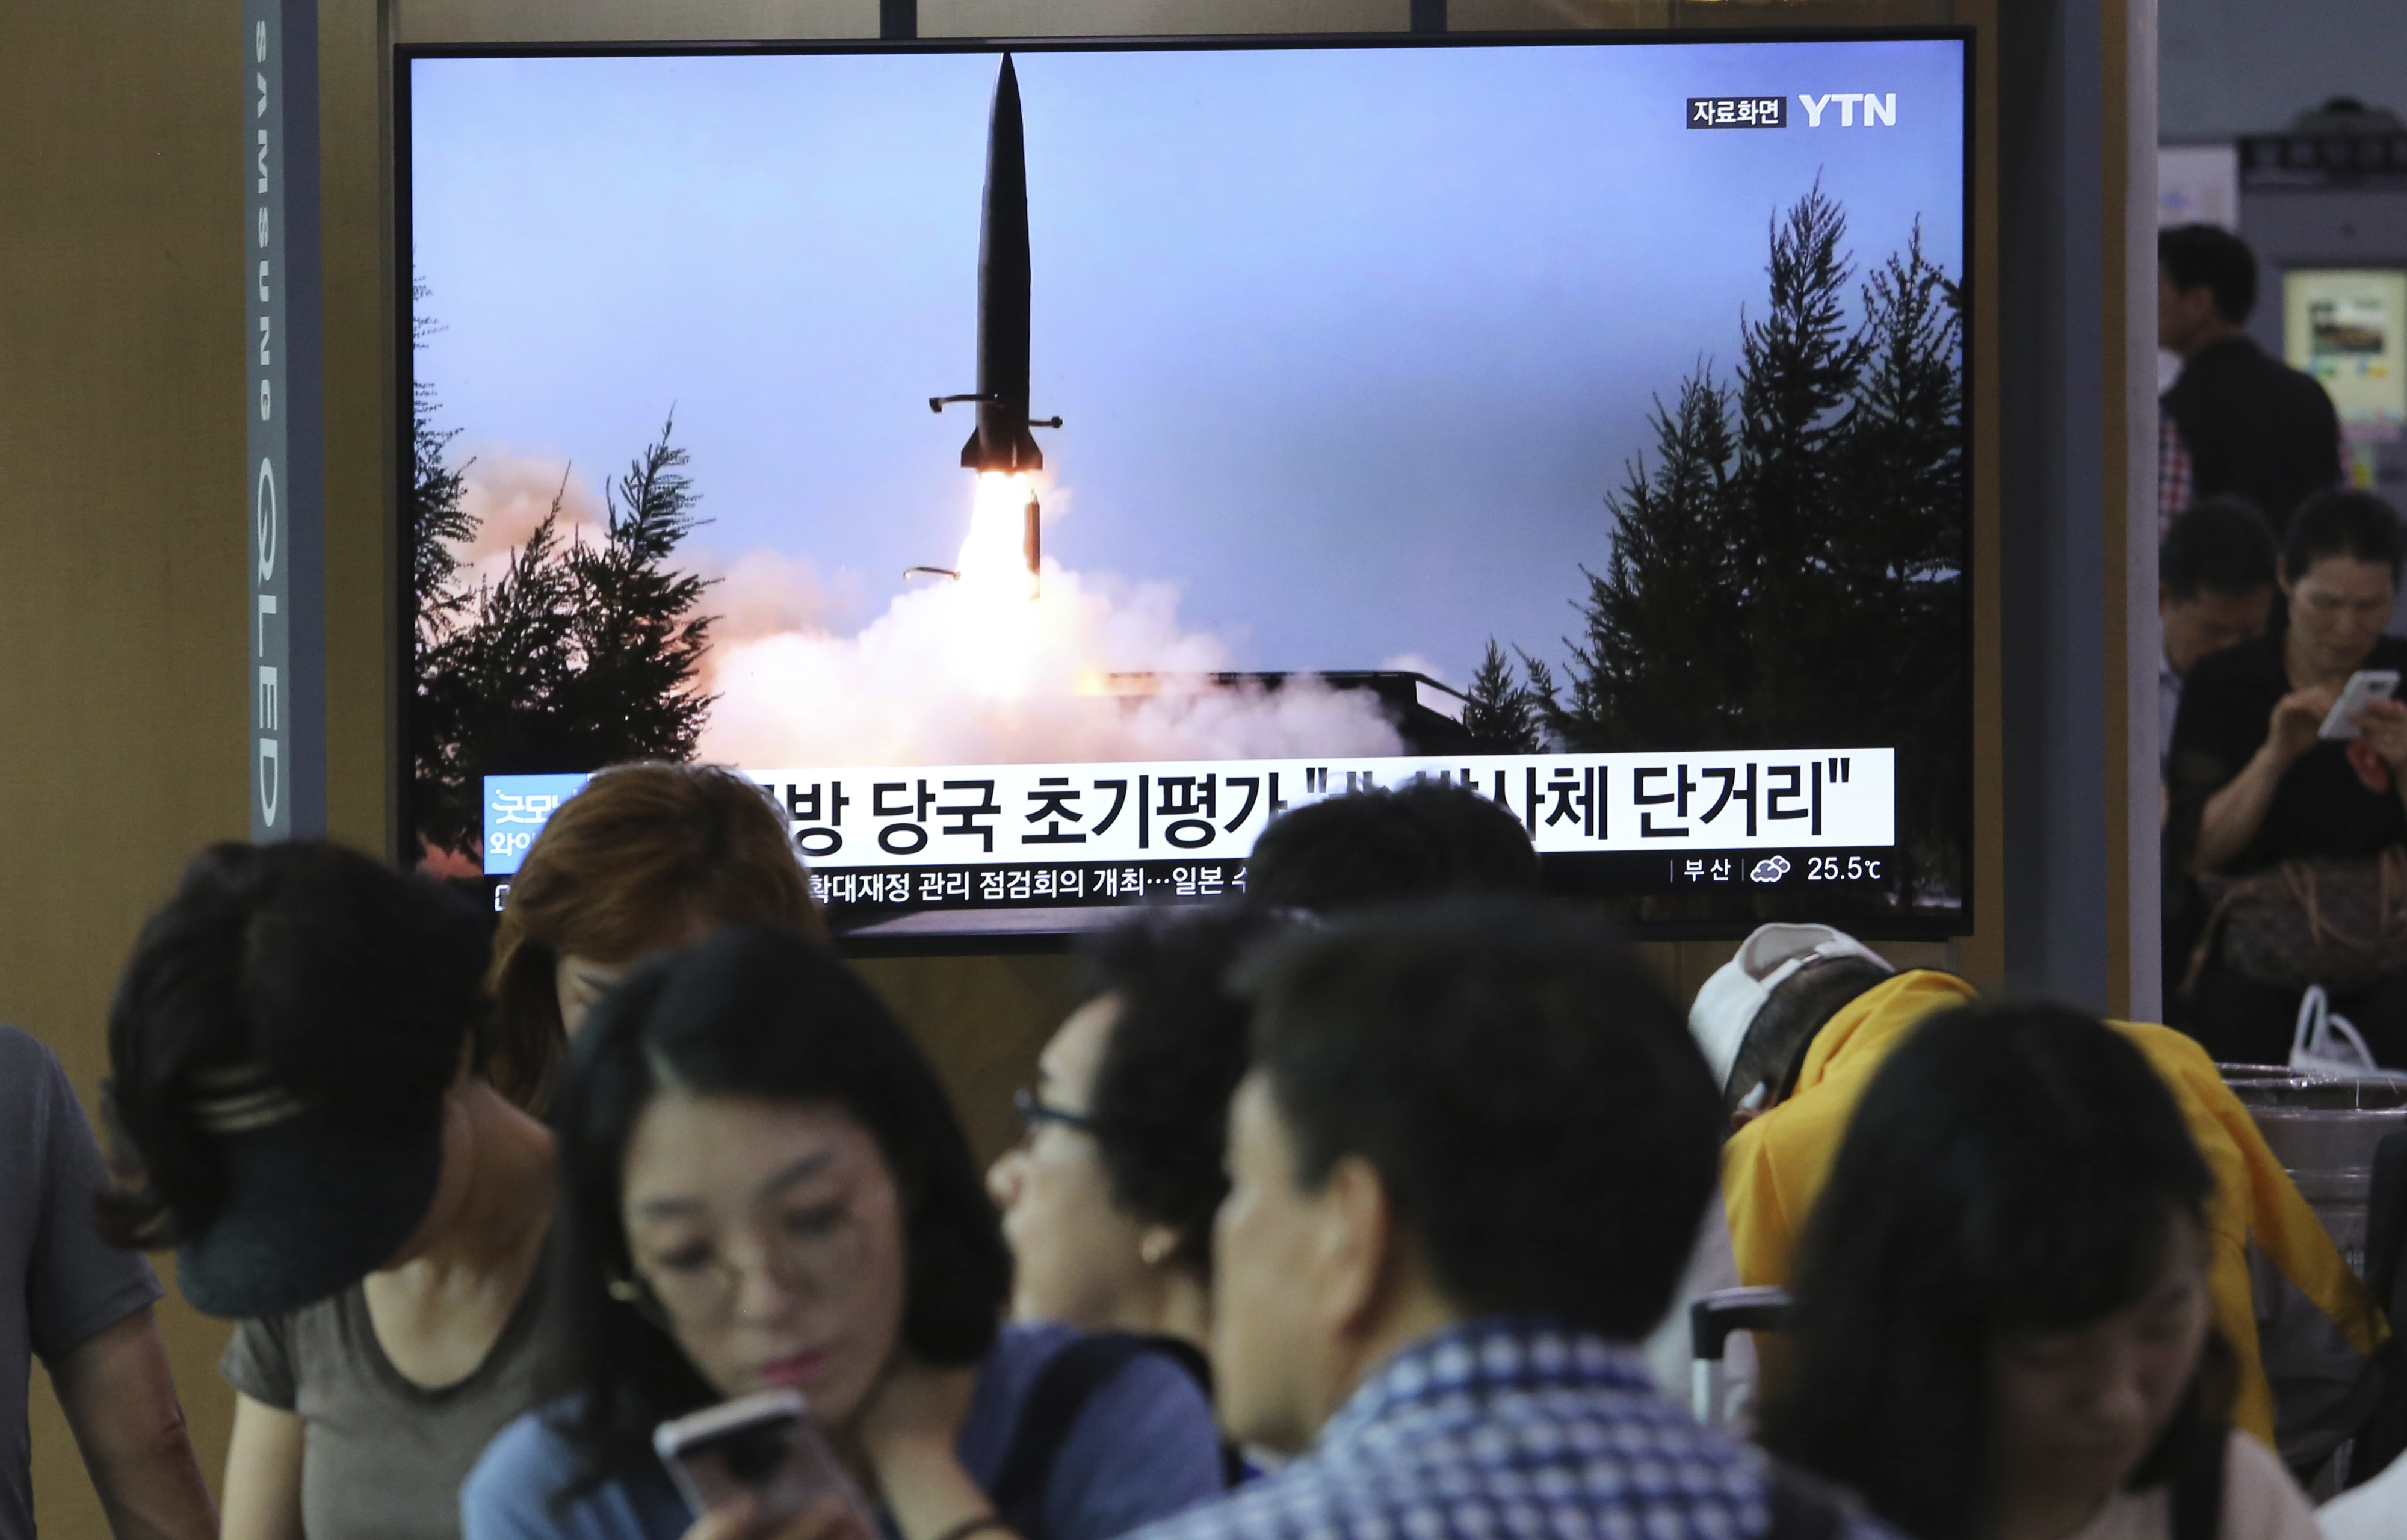 People watch a TV showing a file image of North Korea's missile launch during a news program at the Seoul Railway Station in Seoul, South Korea, Thursday, July 25, 2019. North Korea fired two unidentified projectiles into the sea on Thursday, South Korea's military said, the first launches in more than two months as North Korean and U.S. officials work to restart nuclear diplomacy. The signs read: 